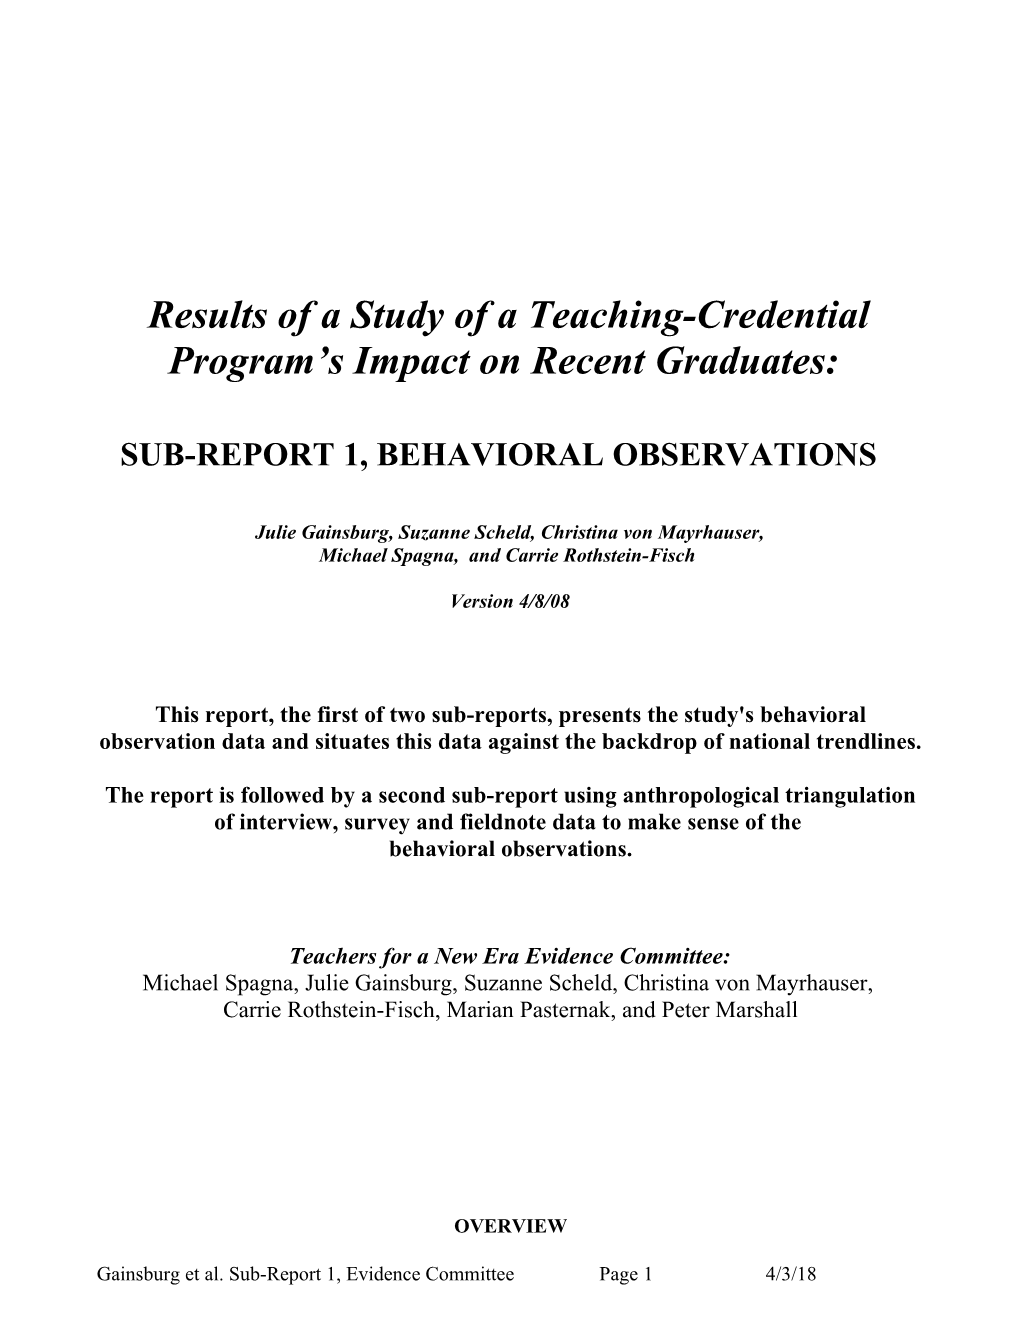 Results of an Evaluative Study of Recent Credential Earners